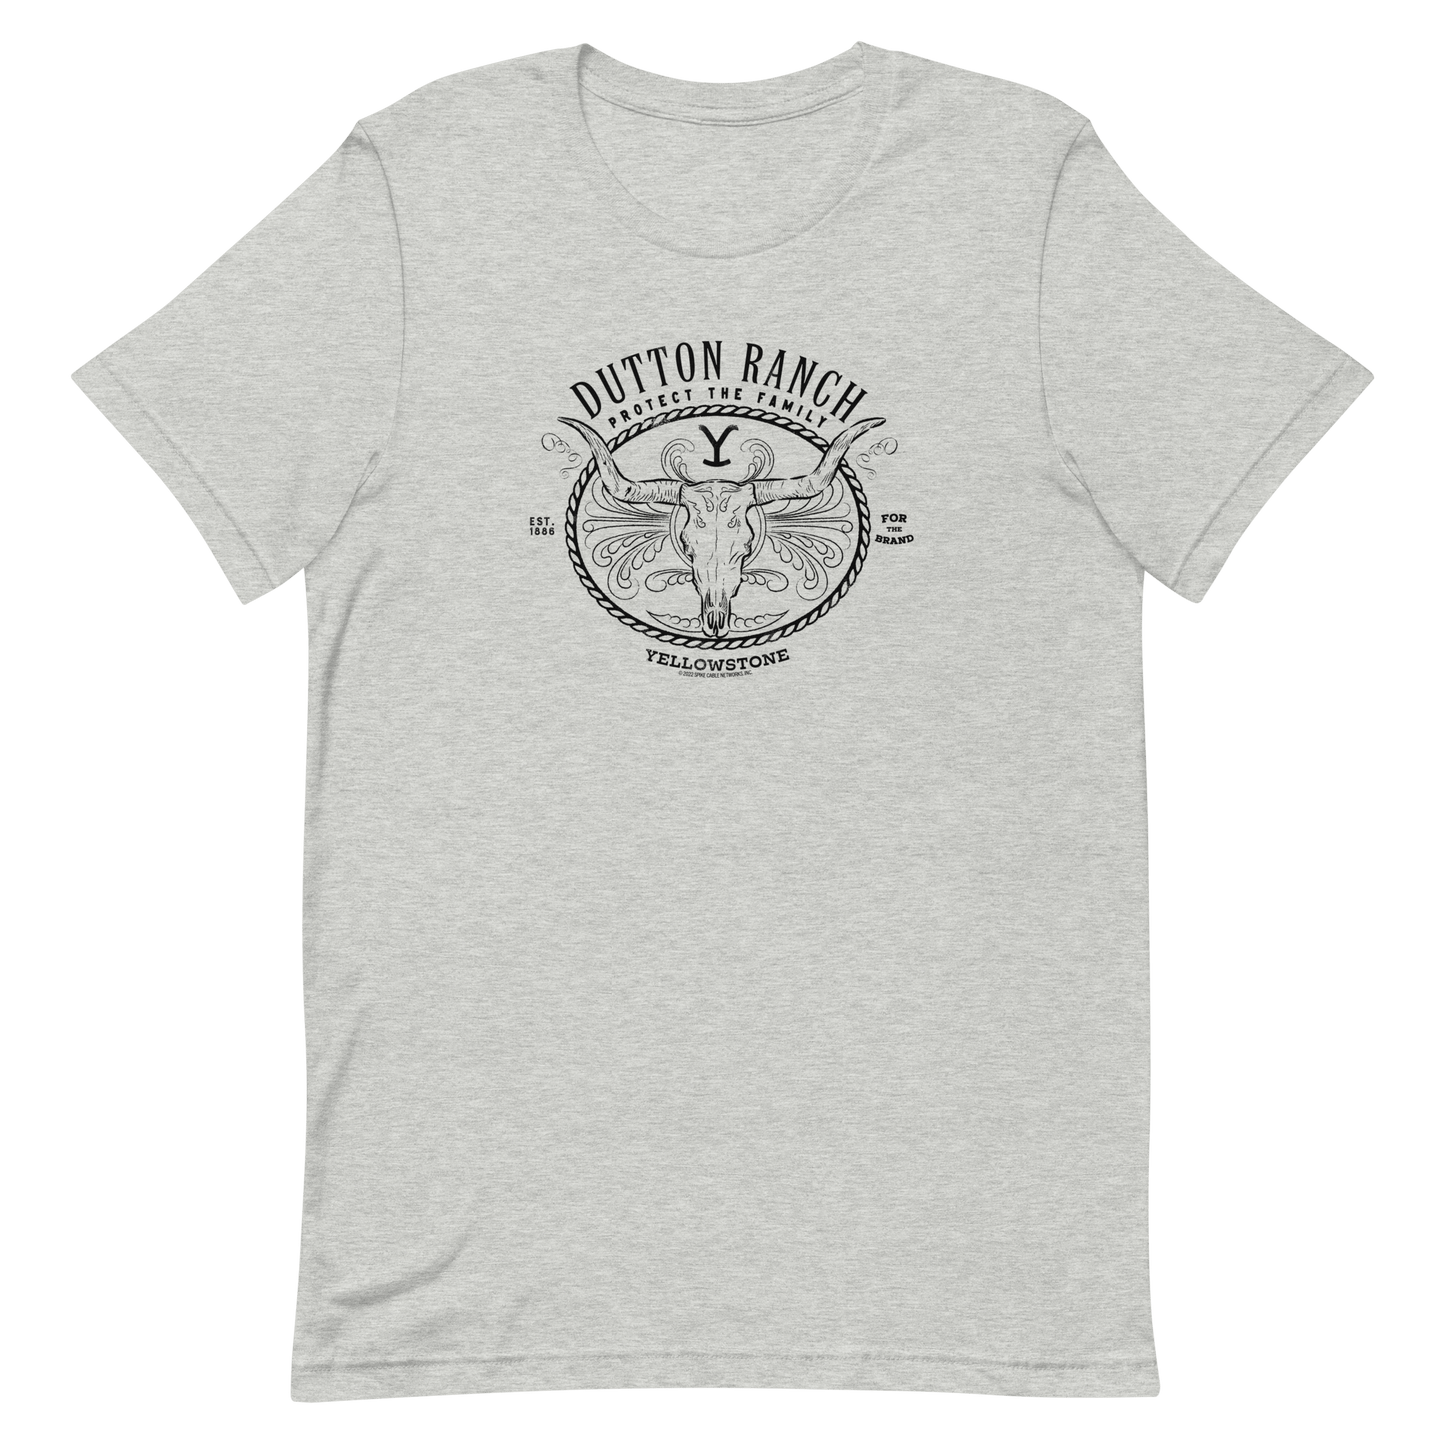 Yellowstone Dutton Ranch Protect the Family Neutral Adult T - Shirt - Paramount Shop